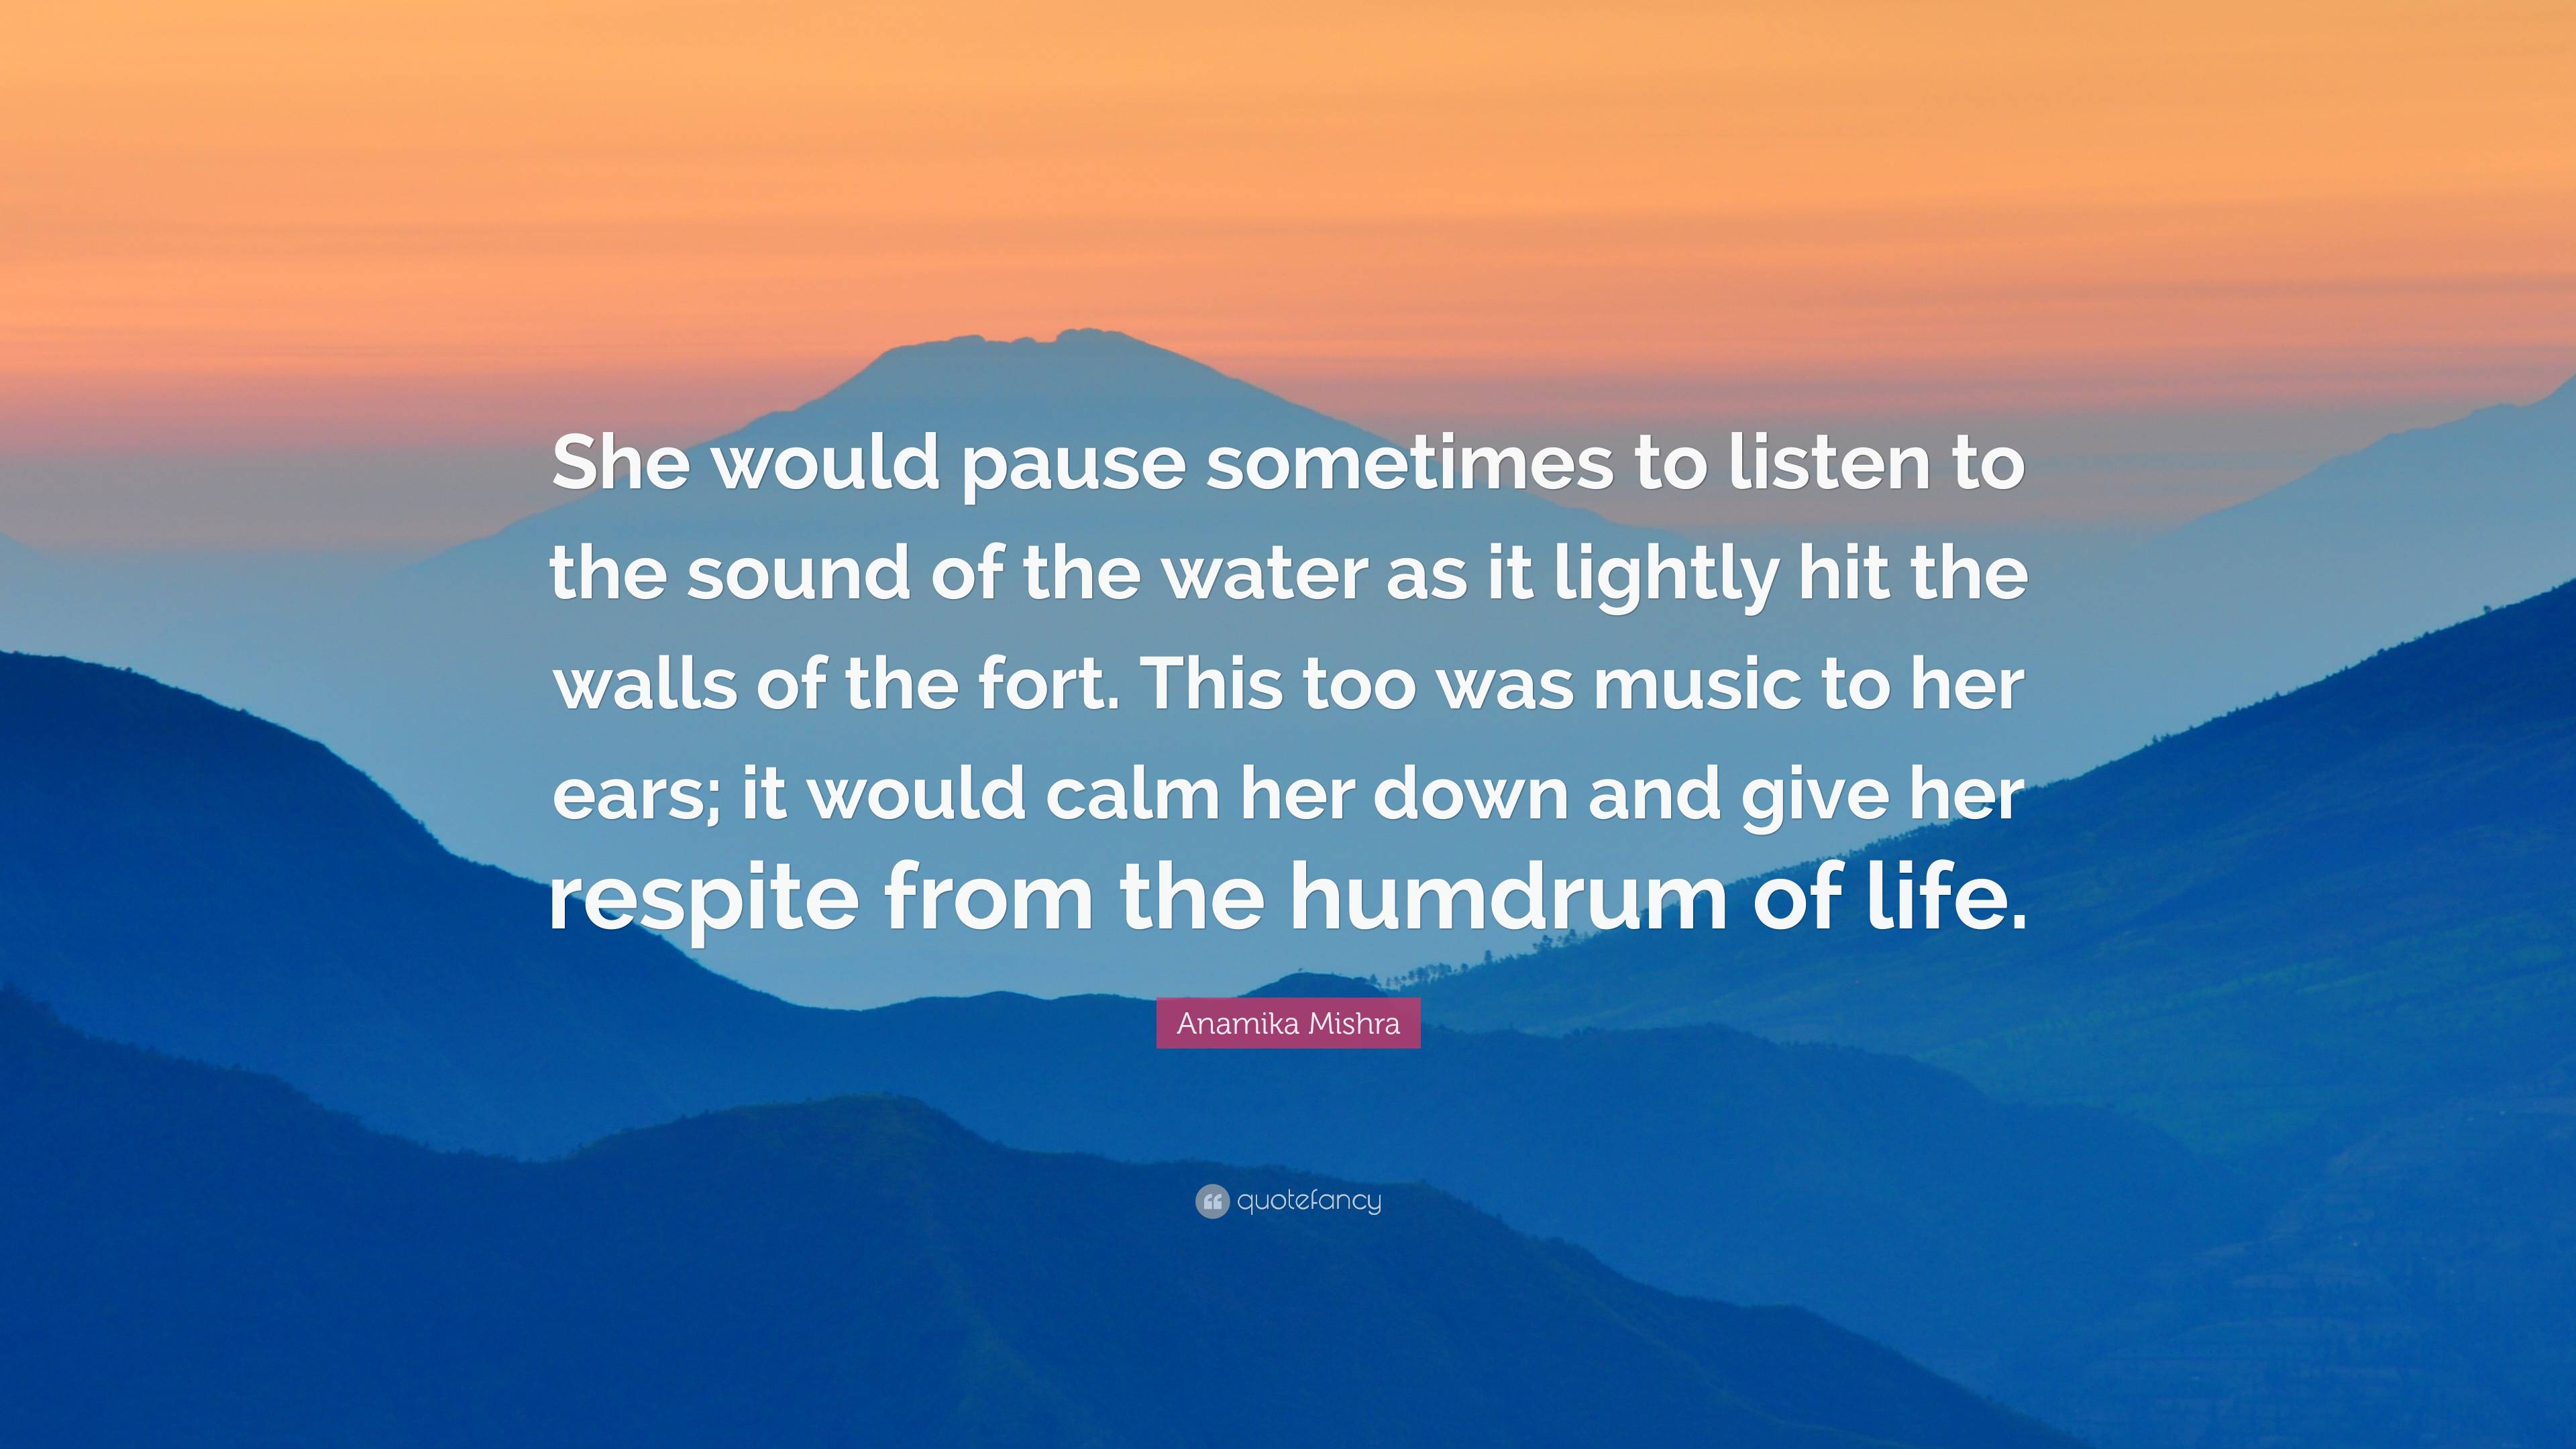 Anamika Mishra Quote: “She would pause sometimes to listen to the sound ...